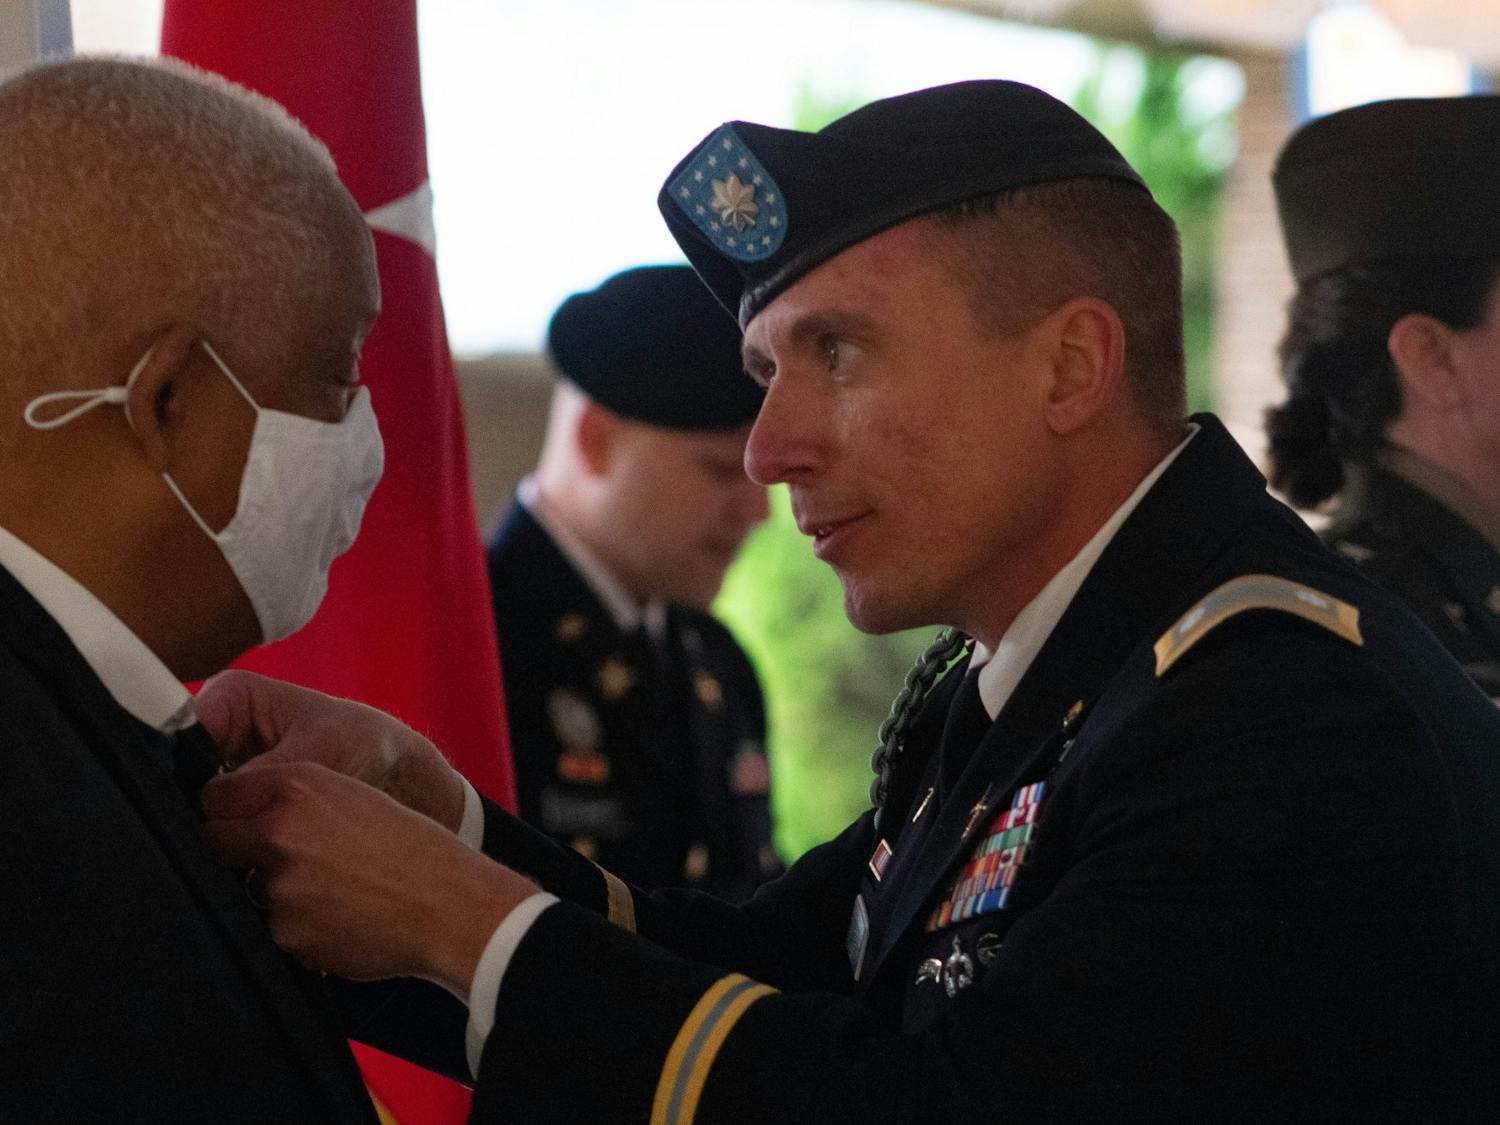 U.S. army veteran John Spencer is awarded the Combat Infantryman badge by Lieutenant Colonel Dan Hurd on Nov. 4, 51 years after he served in the Vietnam War.